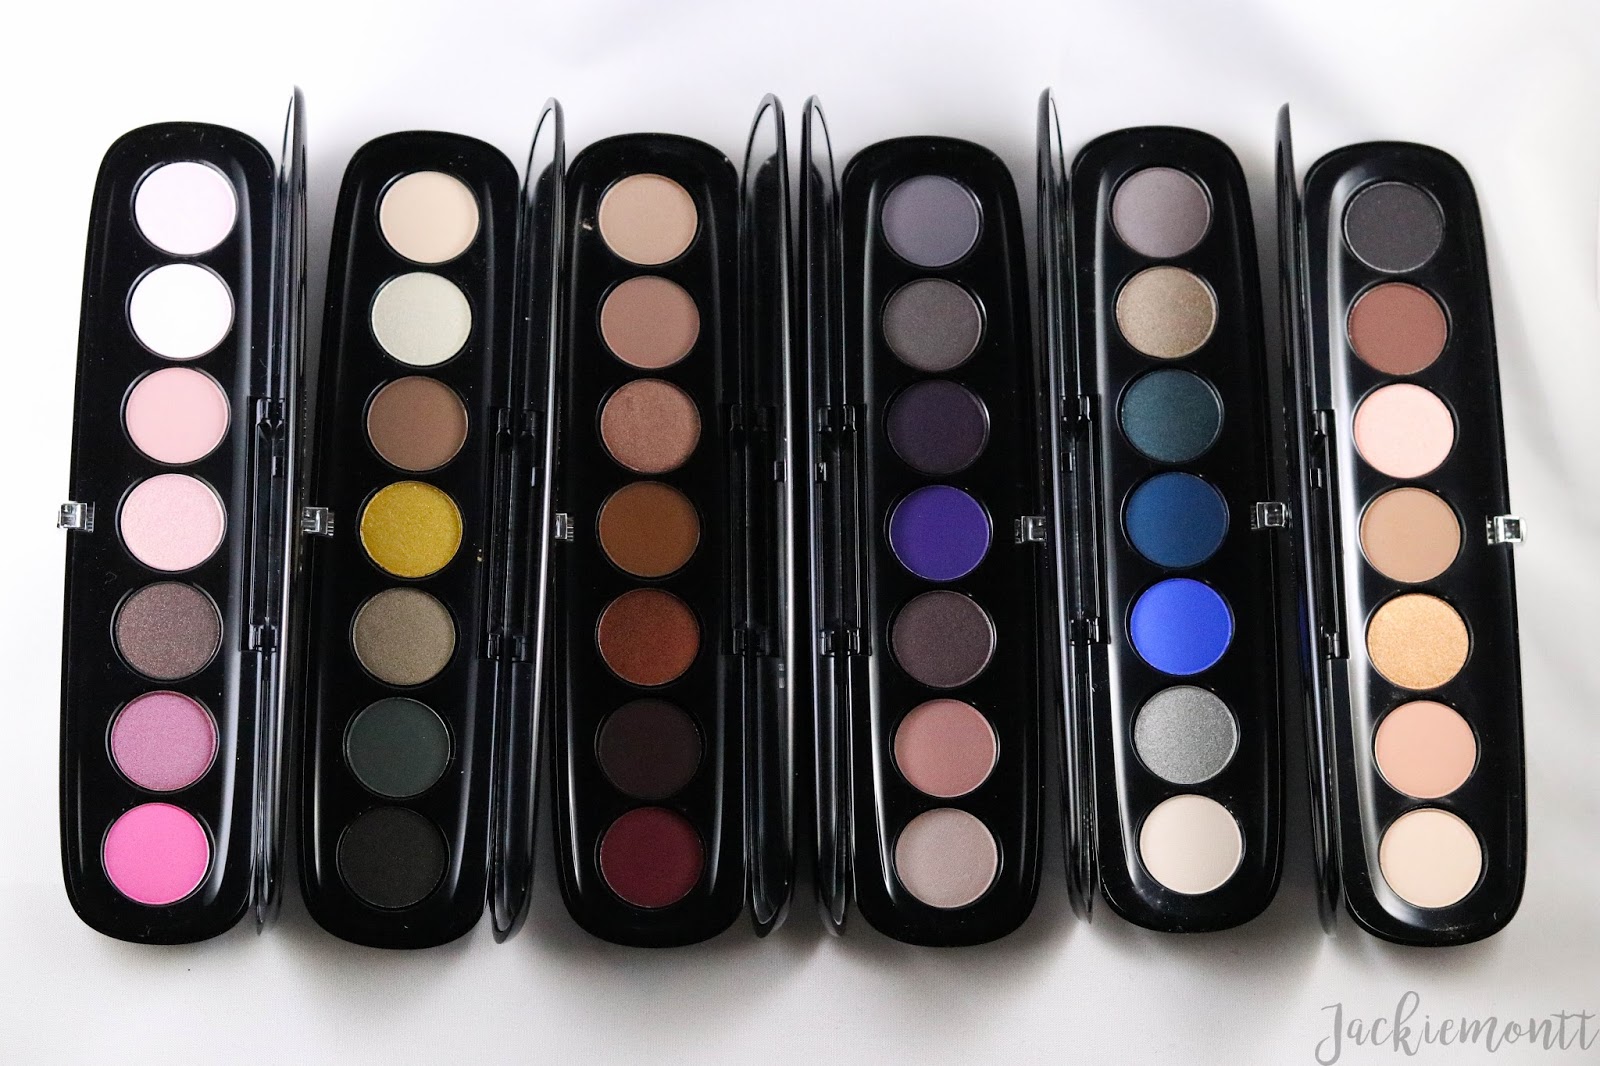 whisky ugyldig Håndfuld Marc Jacobs | Eye-Conic Palettes Review & Look-book - JACKIEMONTT